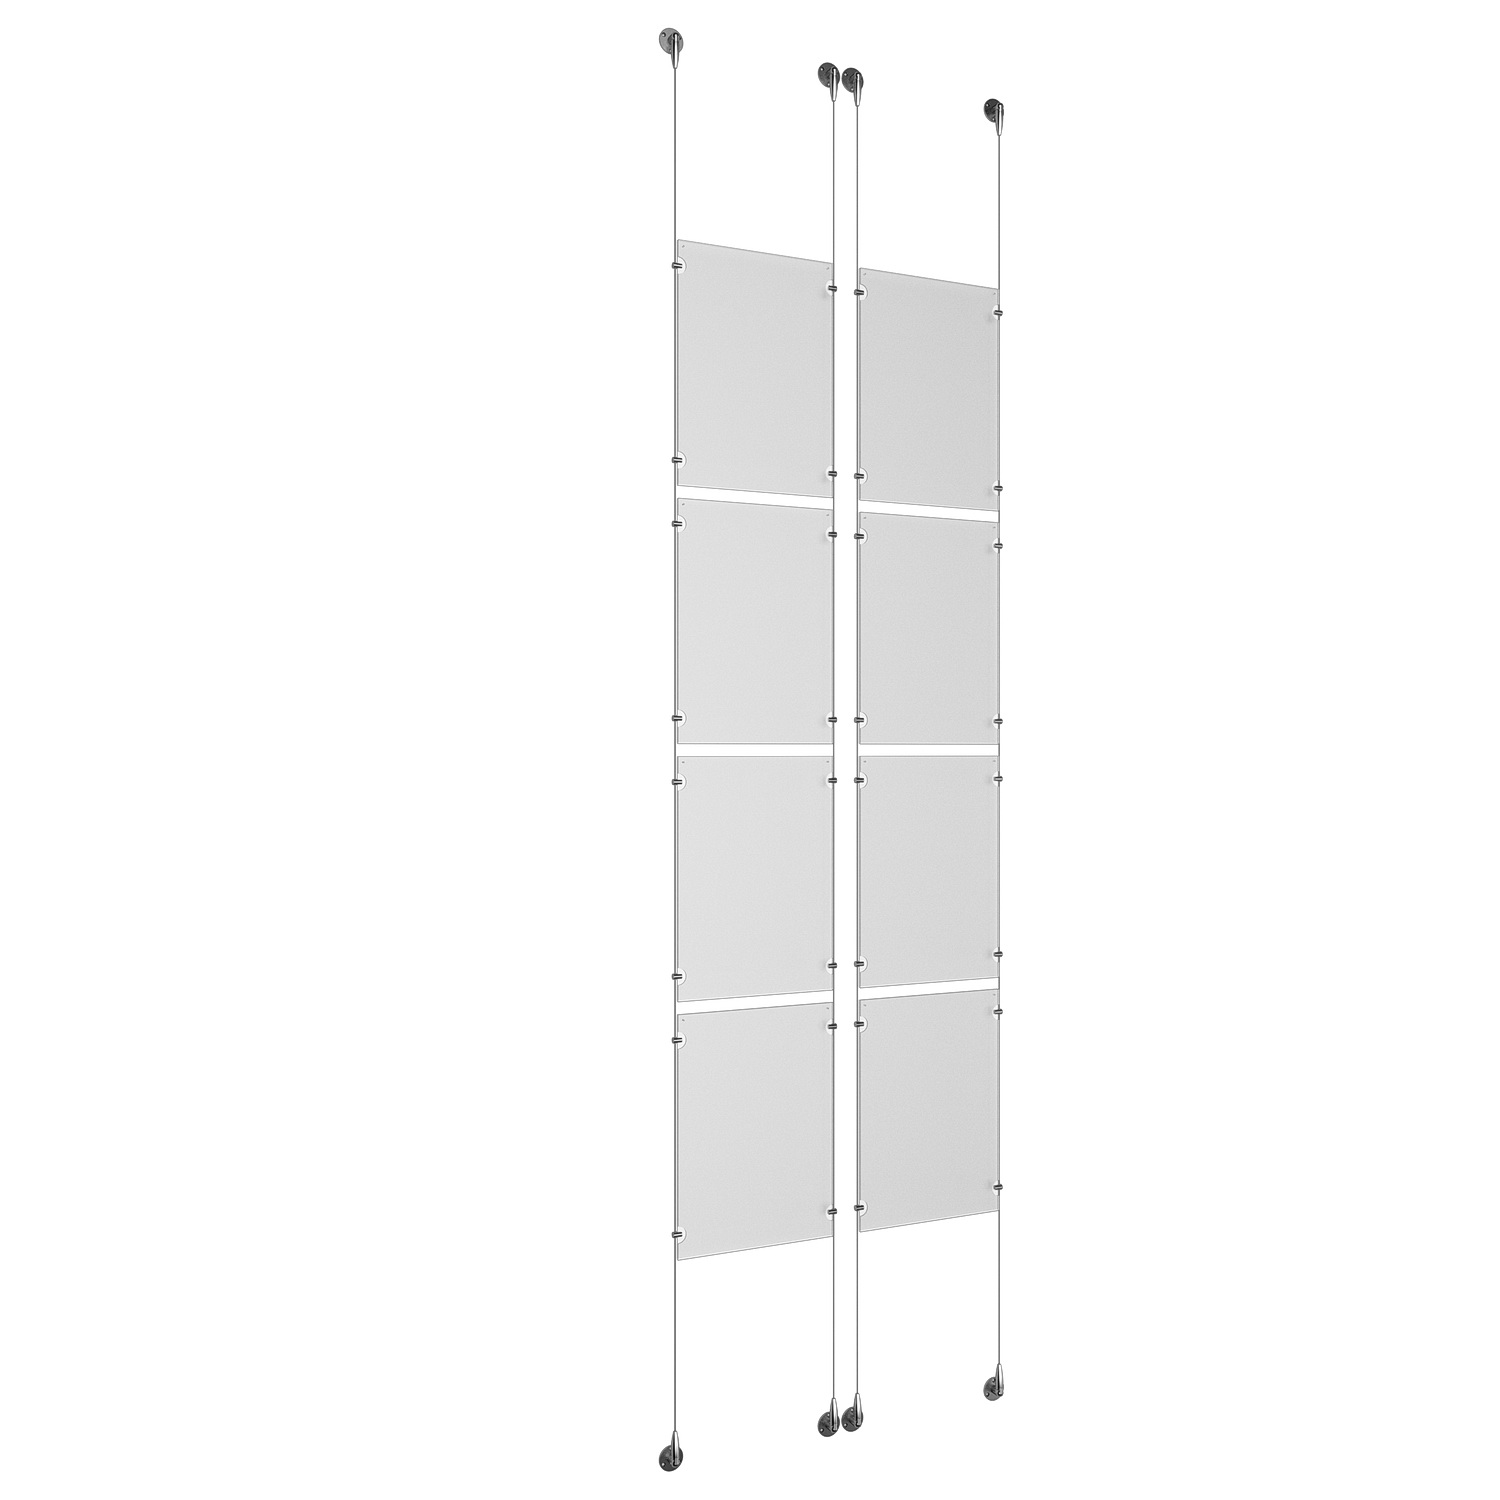 (8) 11'' Width x 17'' Height Clear Acrylic Frame & (4) Aluminum Chrome Polished Adjustable Angle Signature Cable Systems with (32) Single-Sided Panel Grippers